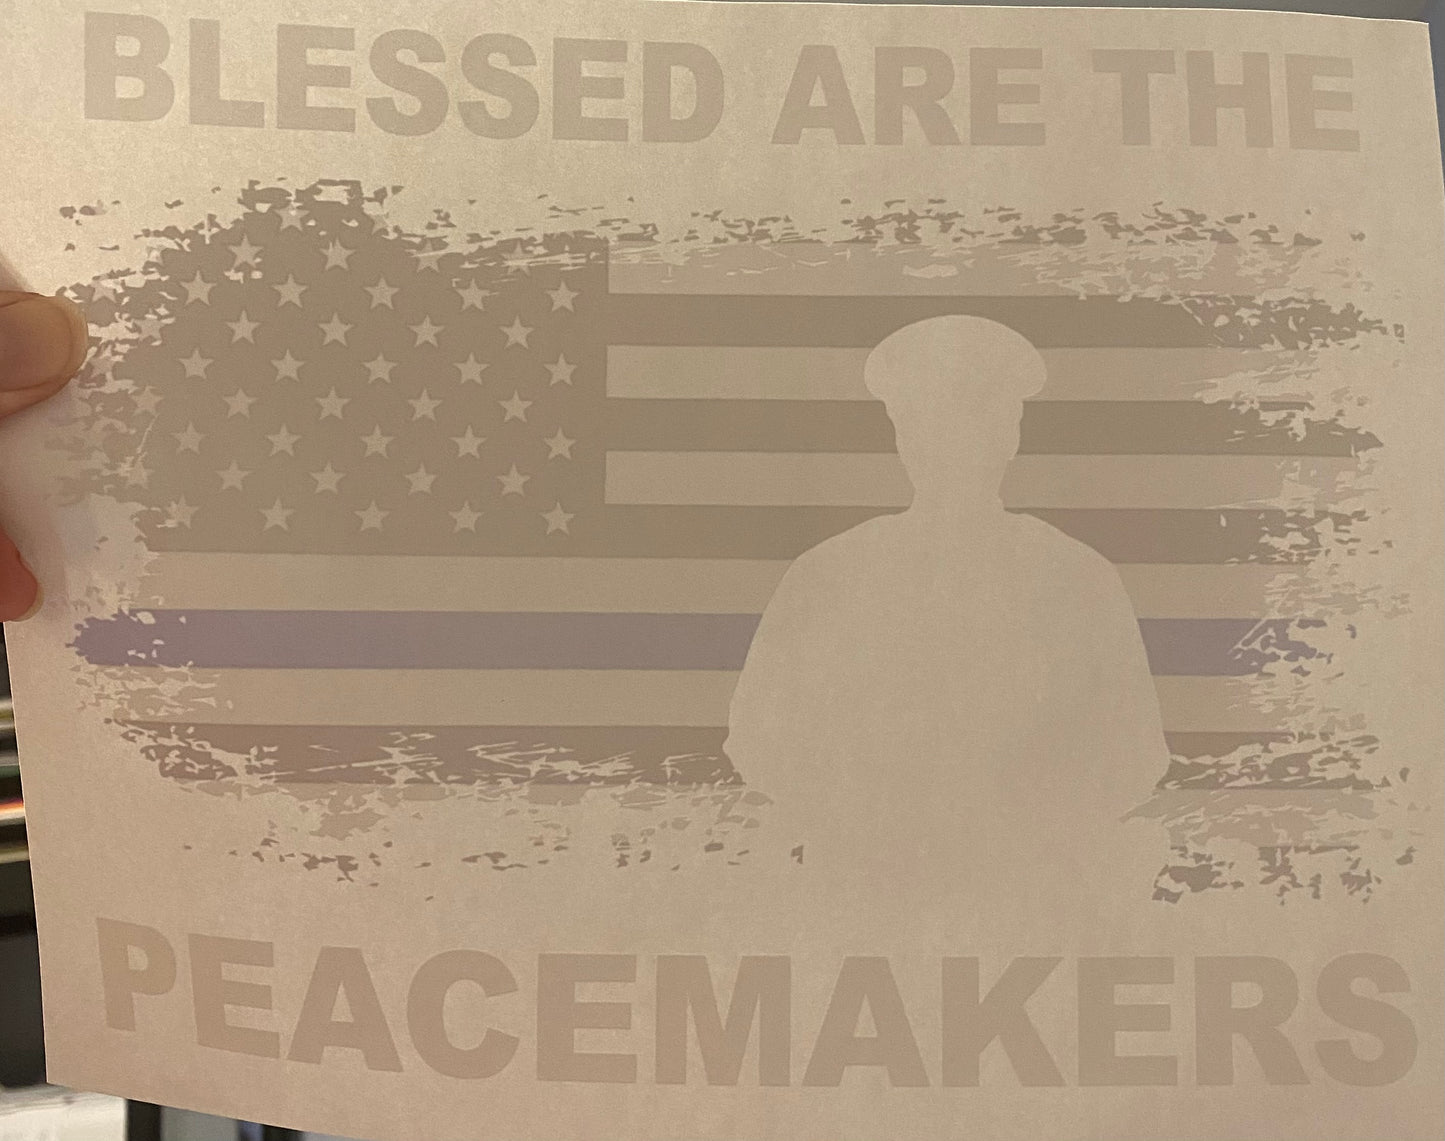 Blessed are the Peacemakers - Blue line